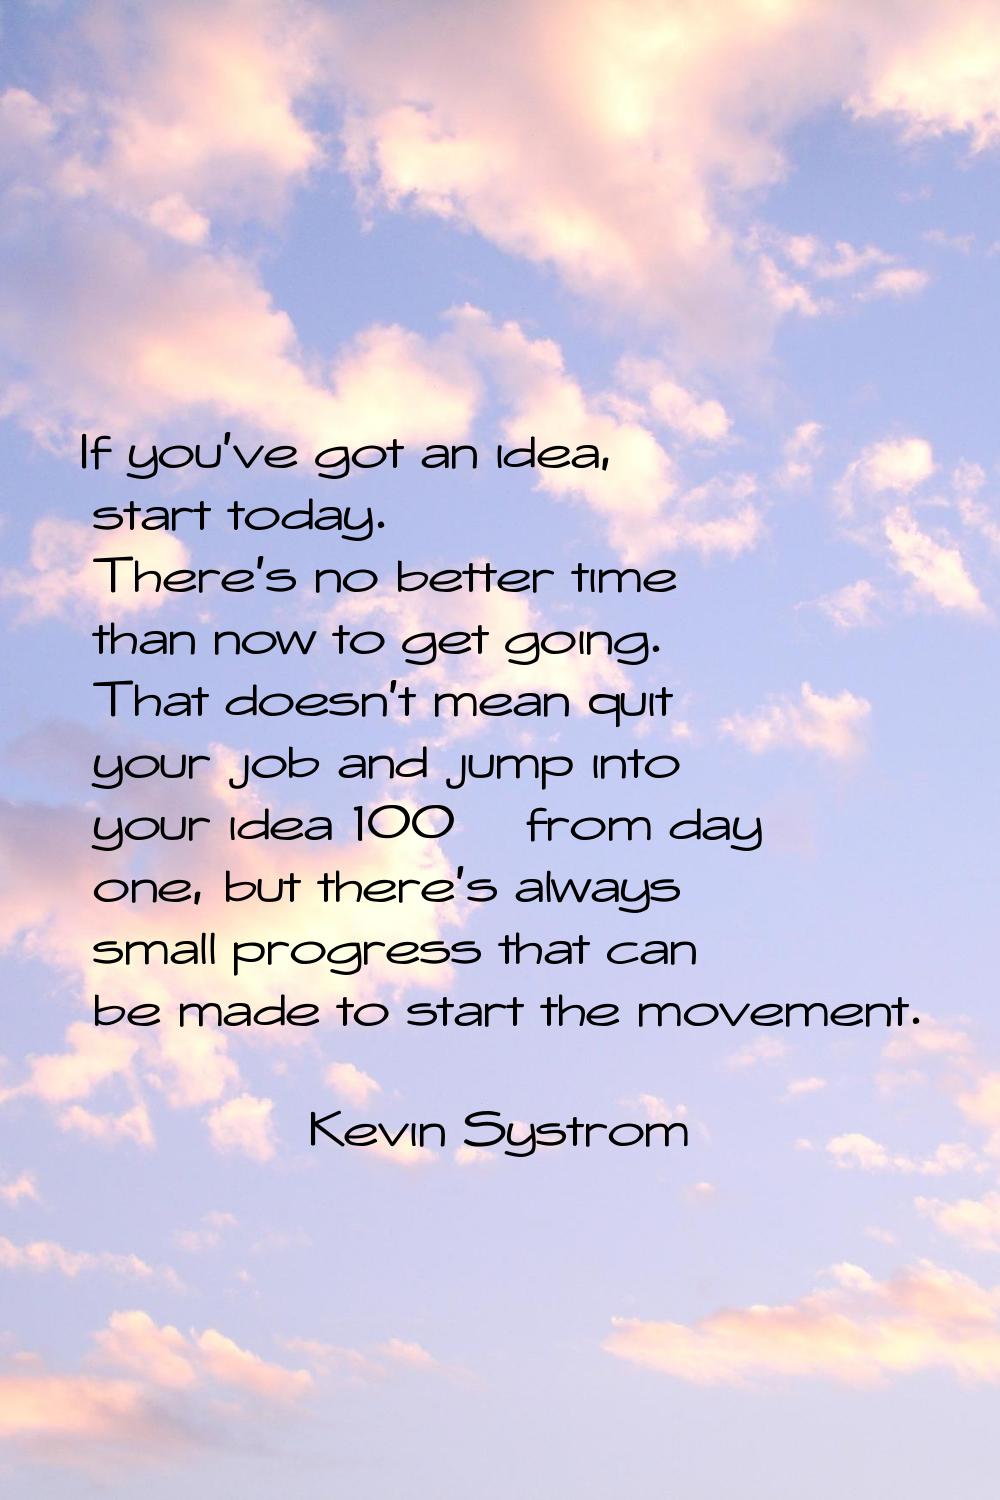 If you've got an idea, start today. There's no better time than now to get going. That doesn't mean